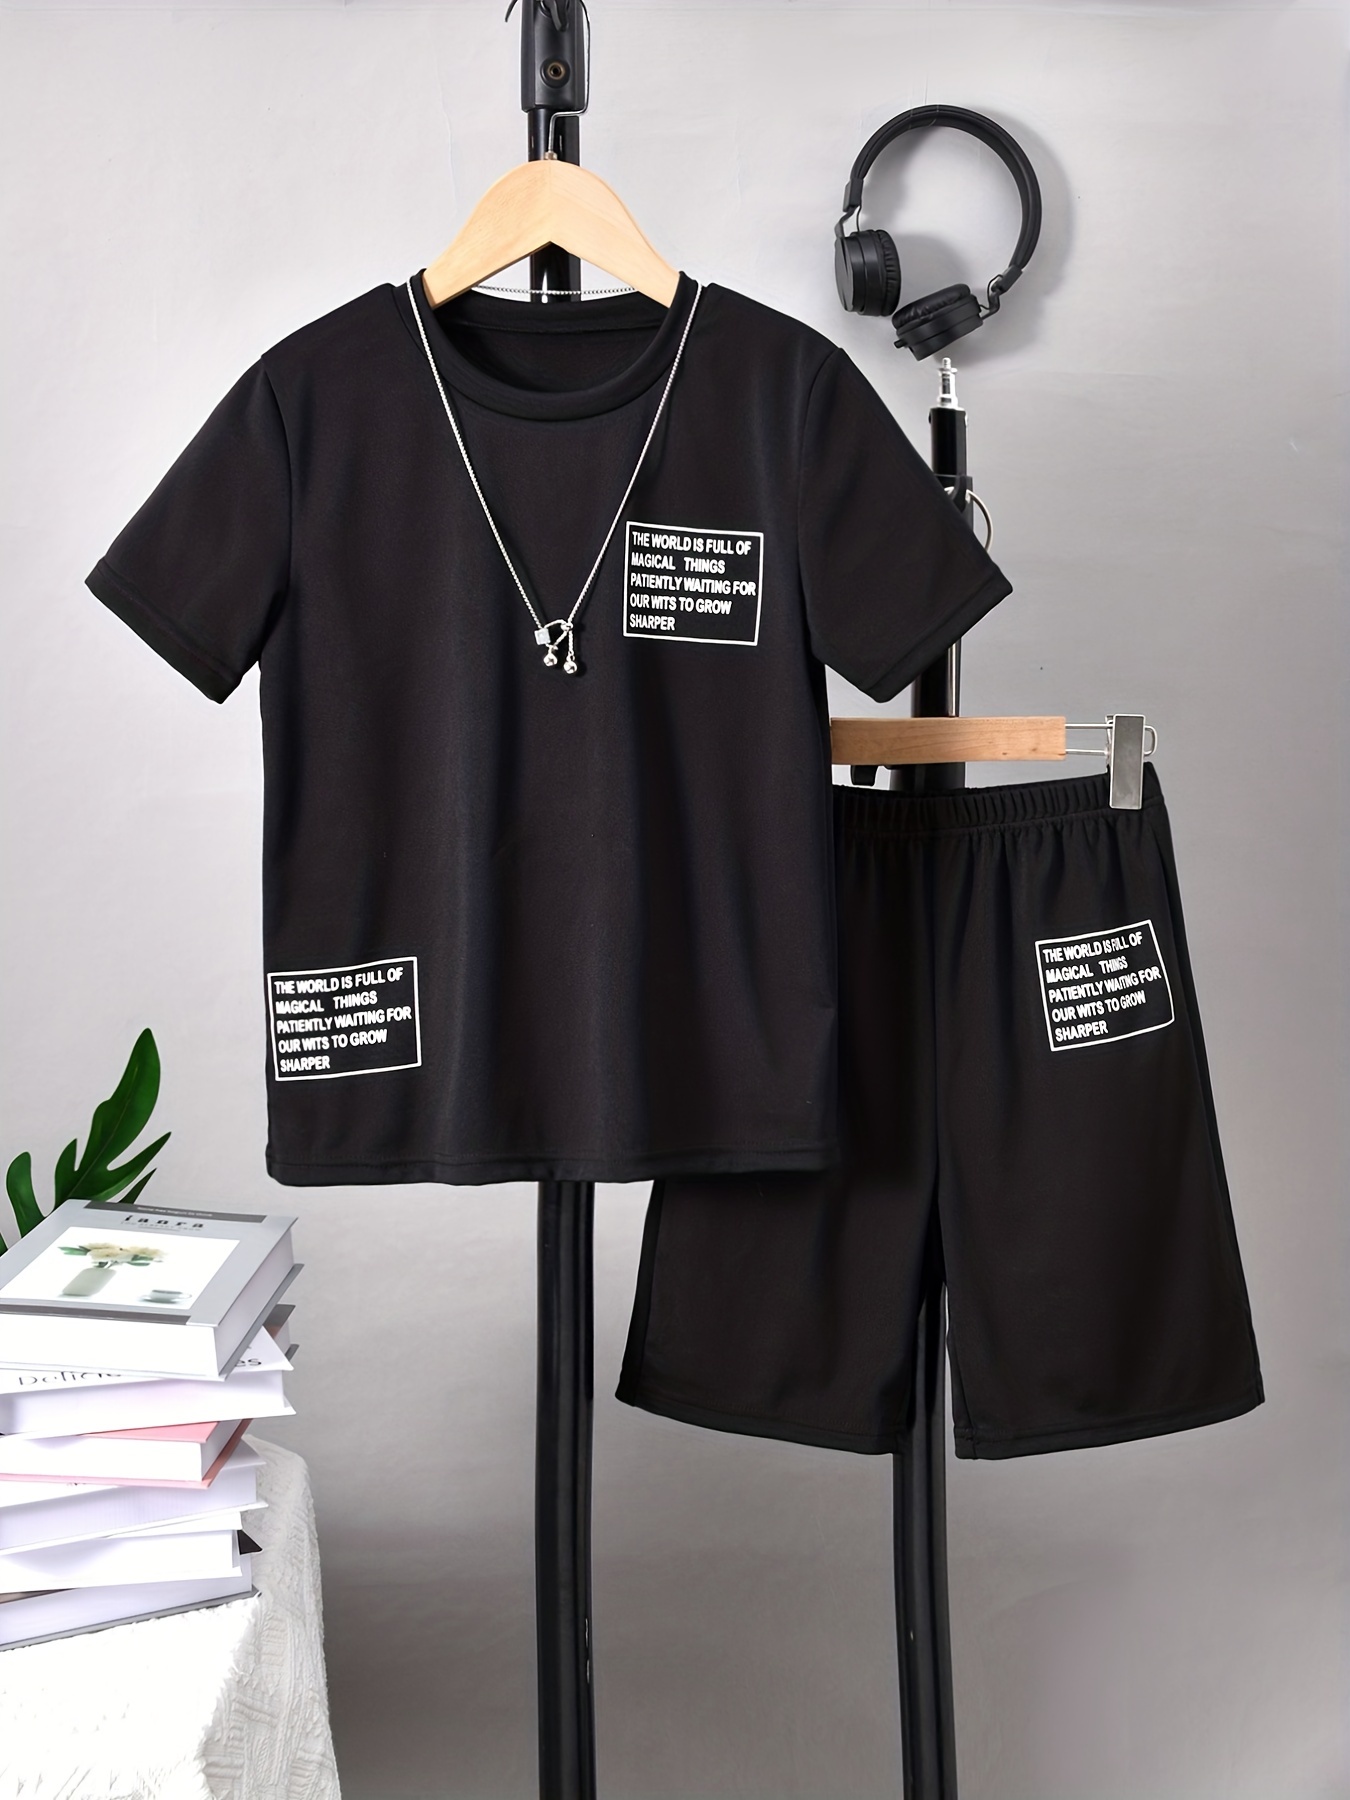 Women's Clothing Plus Size Short Sleeve Elastic Waist Pocket Elegant Casual  Summer Tshirt Dress for Fat Lady - China Dress and Casualdresses price